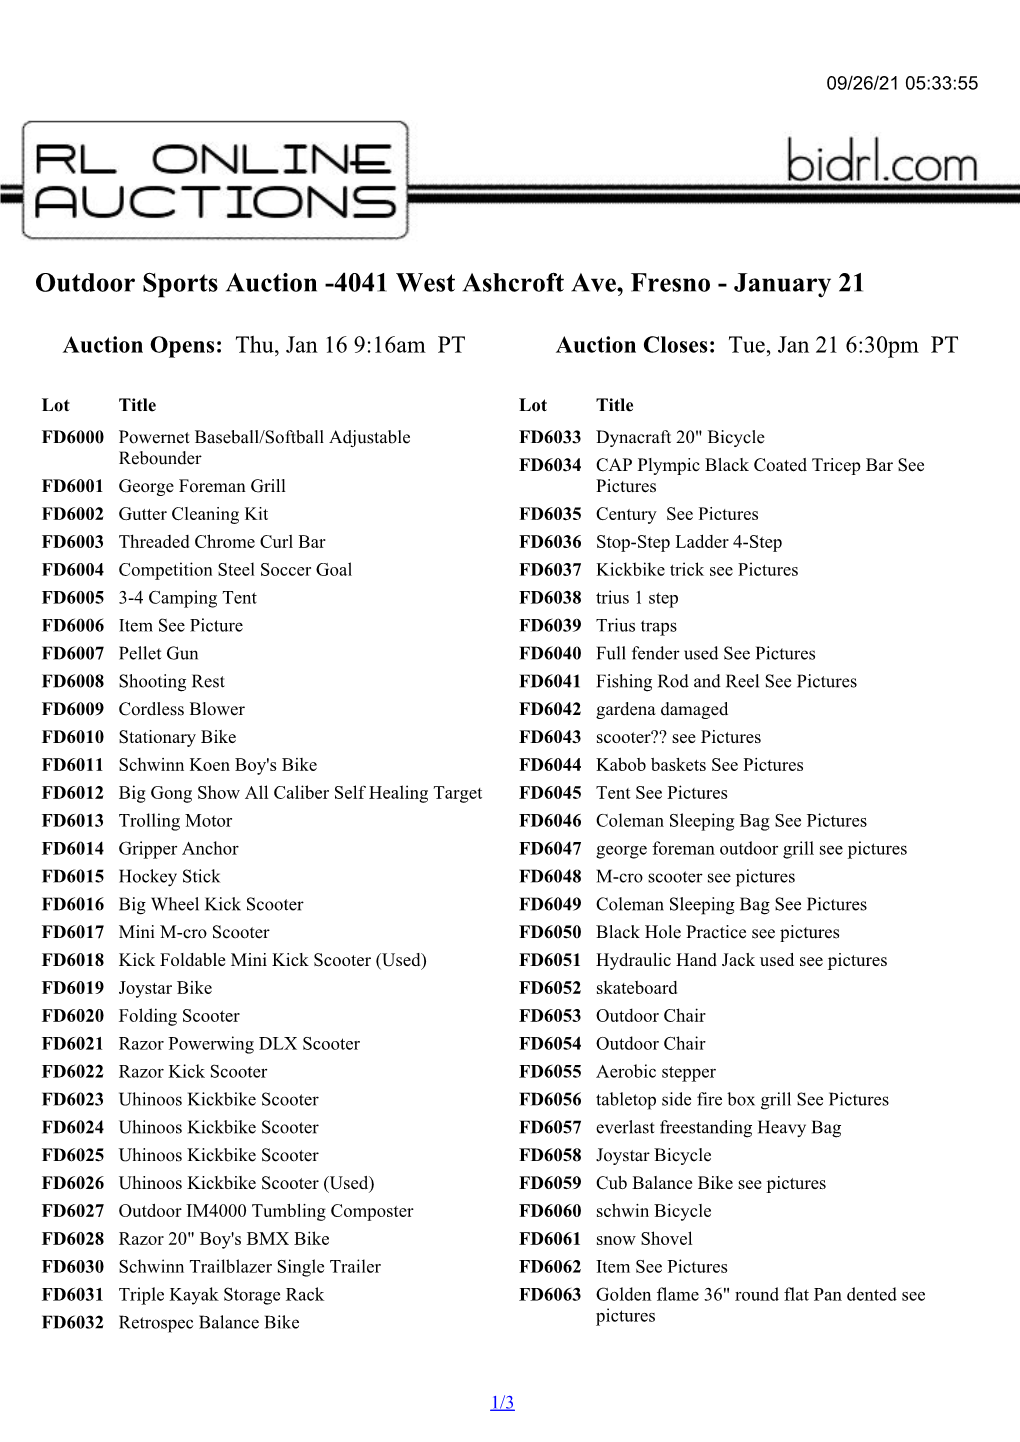 Outdoor Sports Auction -4041 West Ashcroft Ave, Fresno - January 21